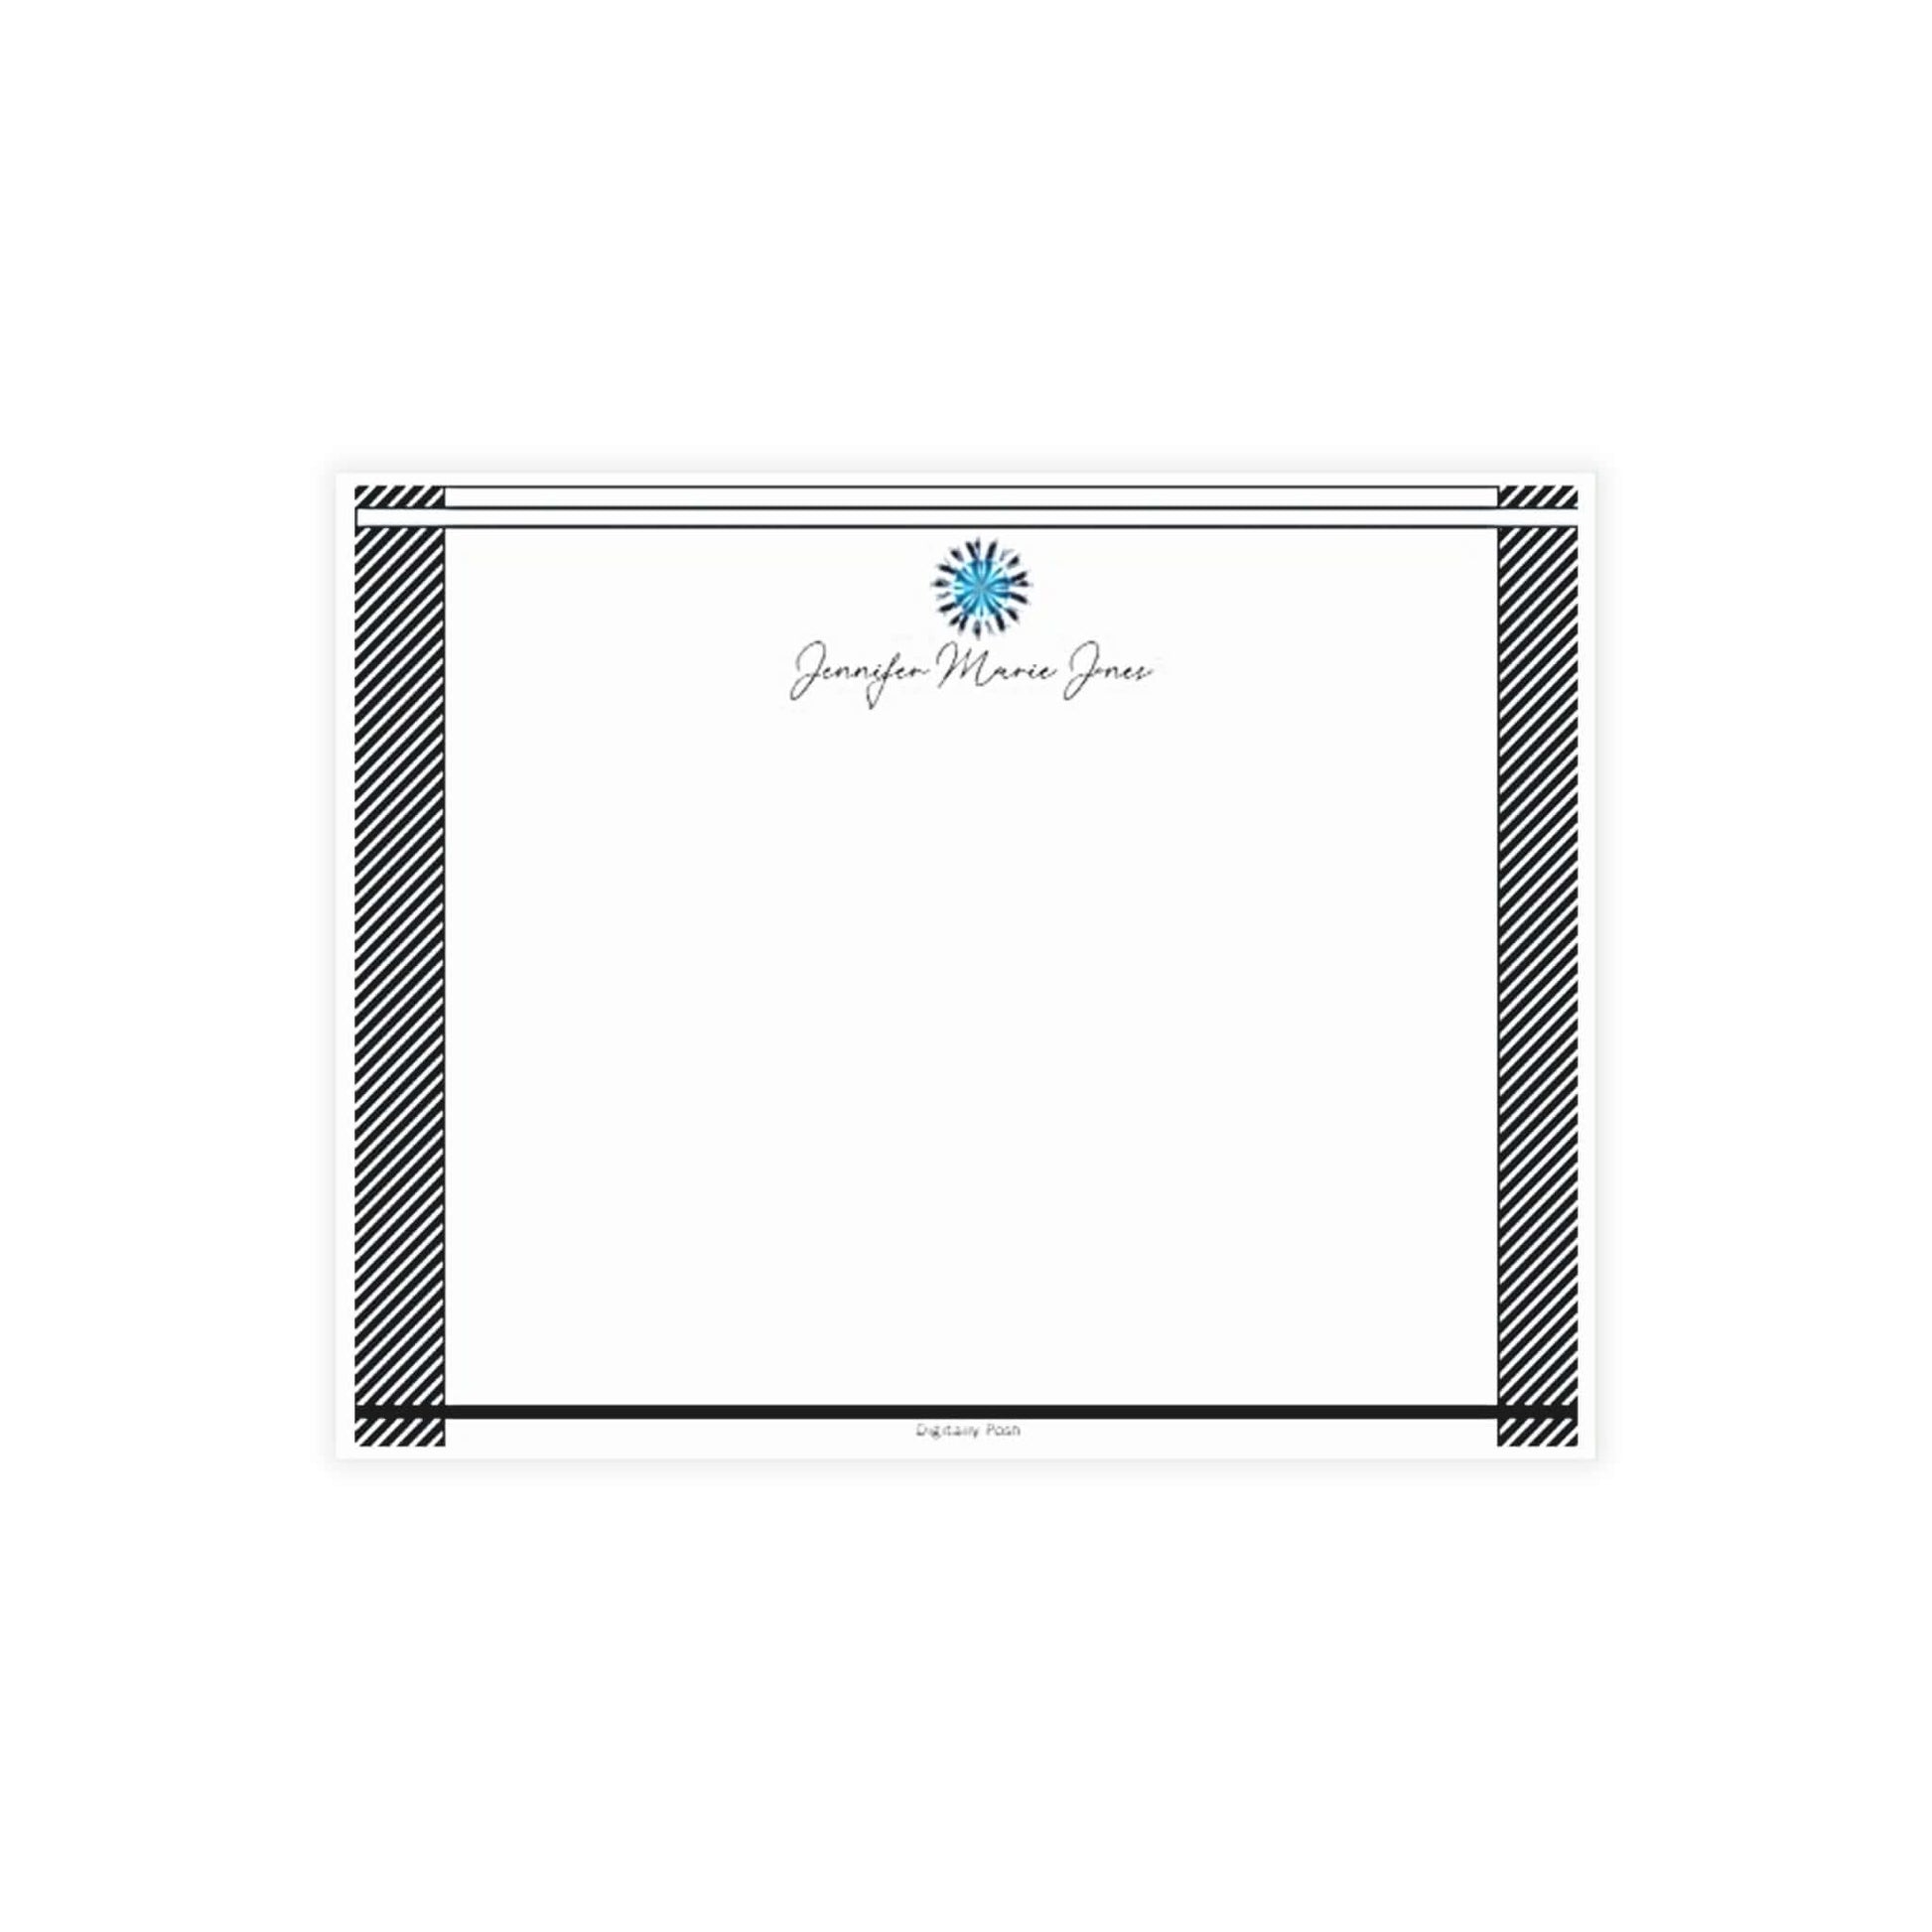 Personalized Note Card: Add a Personal Touch with Customized Stationery for Every Occasion. Blue Diamond Notecard Bundles (envelopes included)